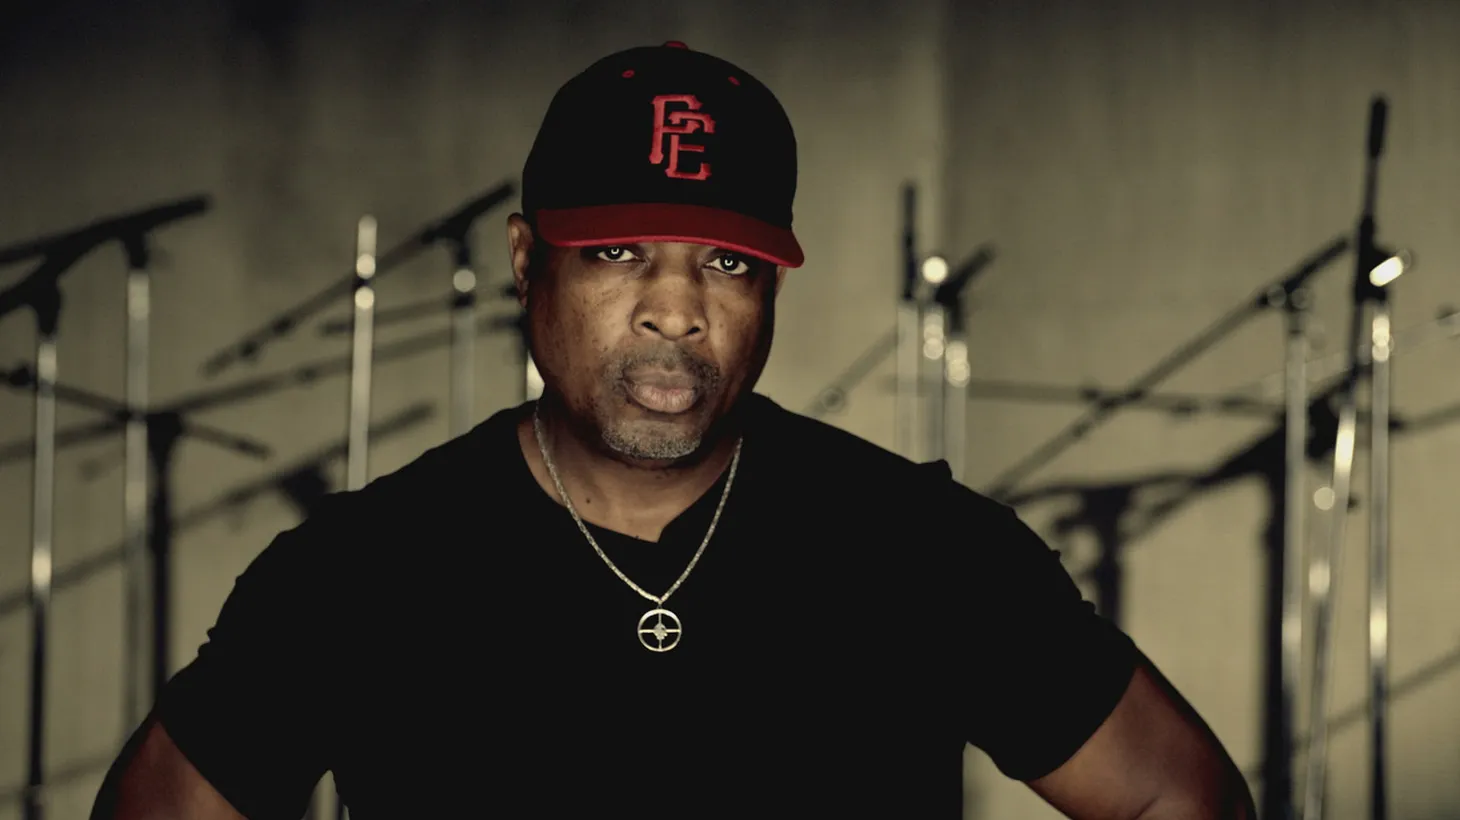 “Attention is the cheapest price to pay. But now we have calamity, drama, and trauma always floating to the top of the news. And peace, love, and understanding is something that never really gets talked about, passed around as easily. So we have to reinforce that in our artistry,” says Public Enemy’s Chuck D.